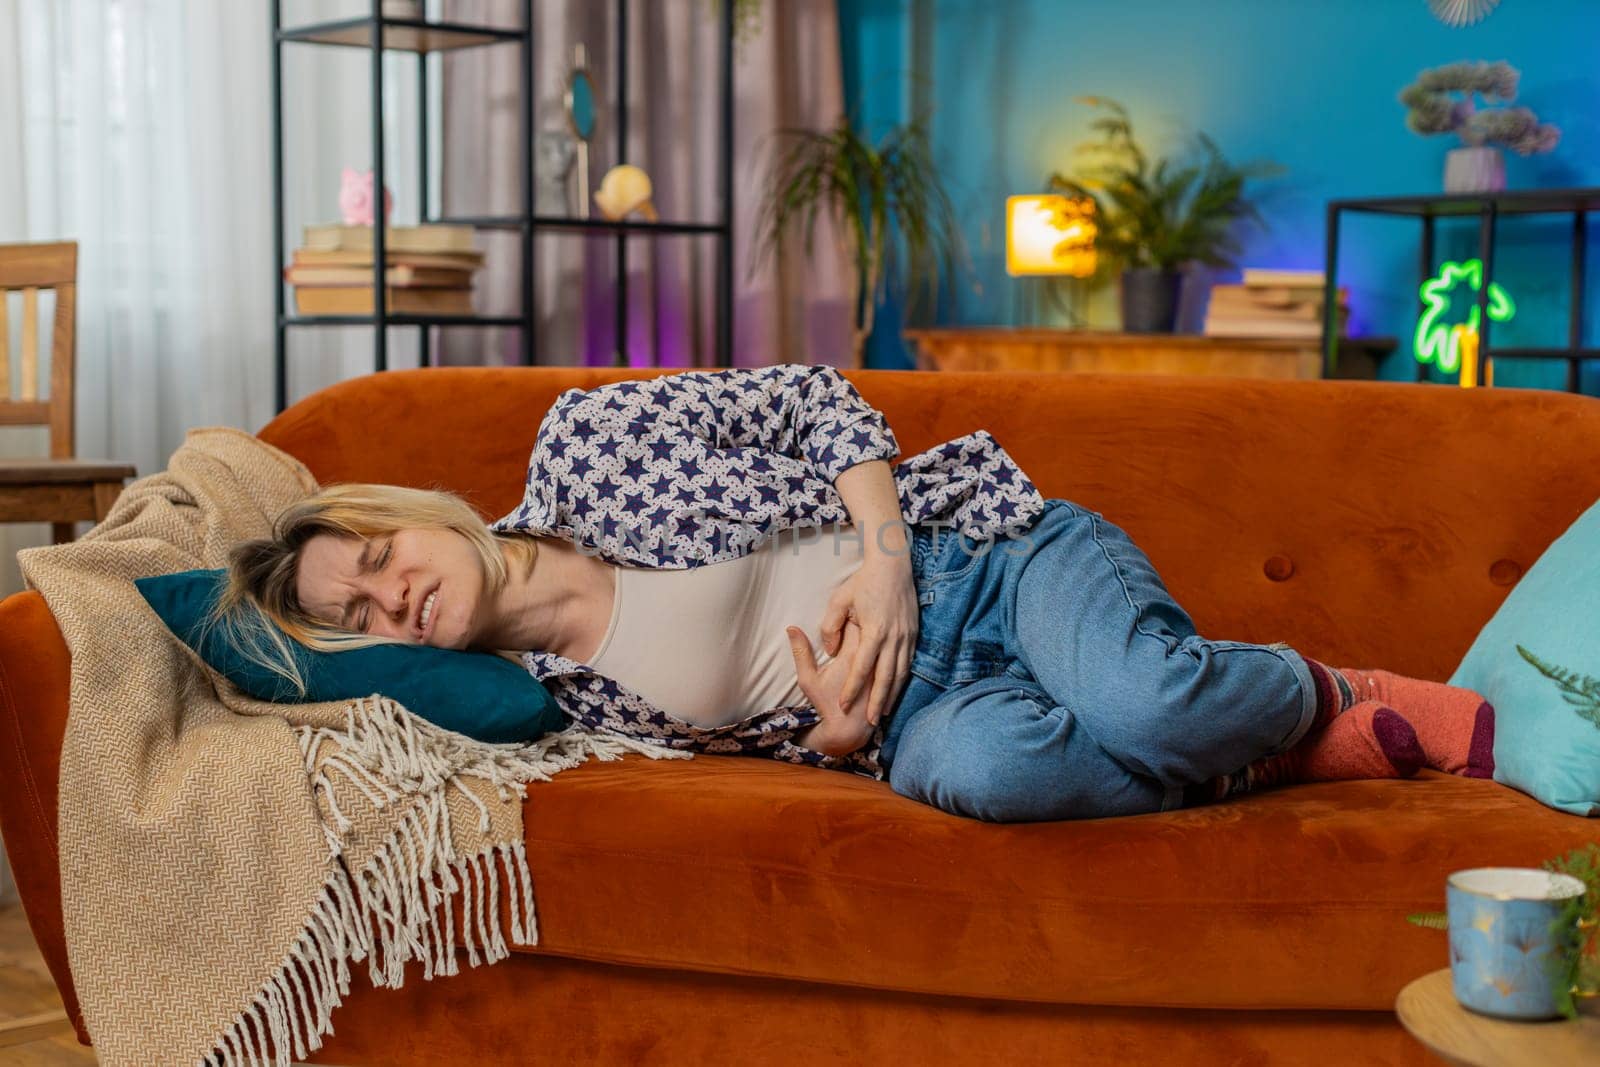 Upset young woman embracing belly suffering from stomachache lying on sofa. Unhappy sad Caucasian girl having menstrual painful feelings, resting on couch. Gastritis, abdominal or period pain concept.